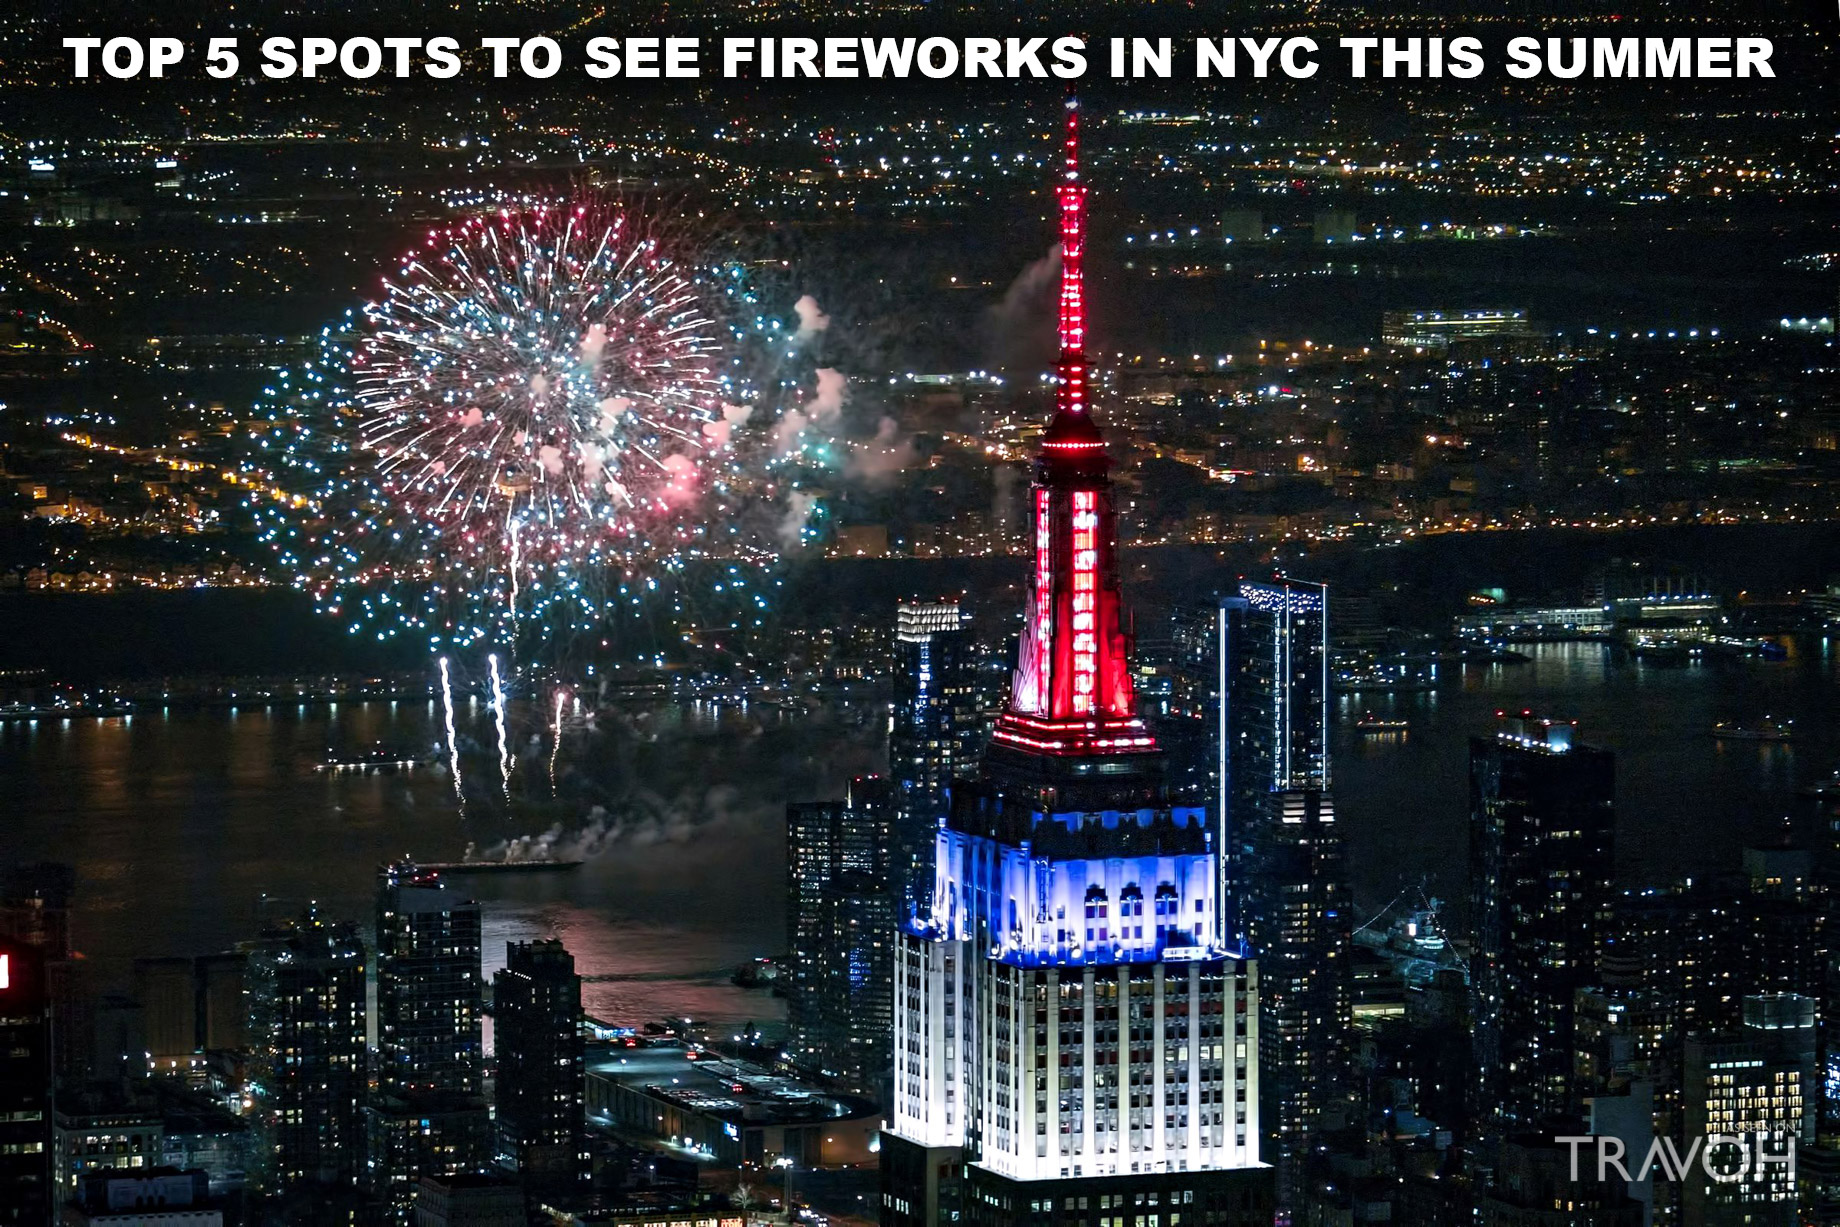 Top 5 Spots to See Fireworks in NYC this Summer